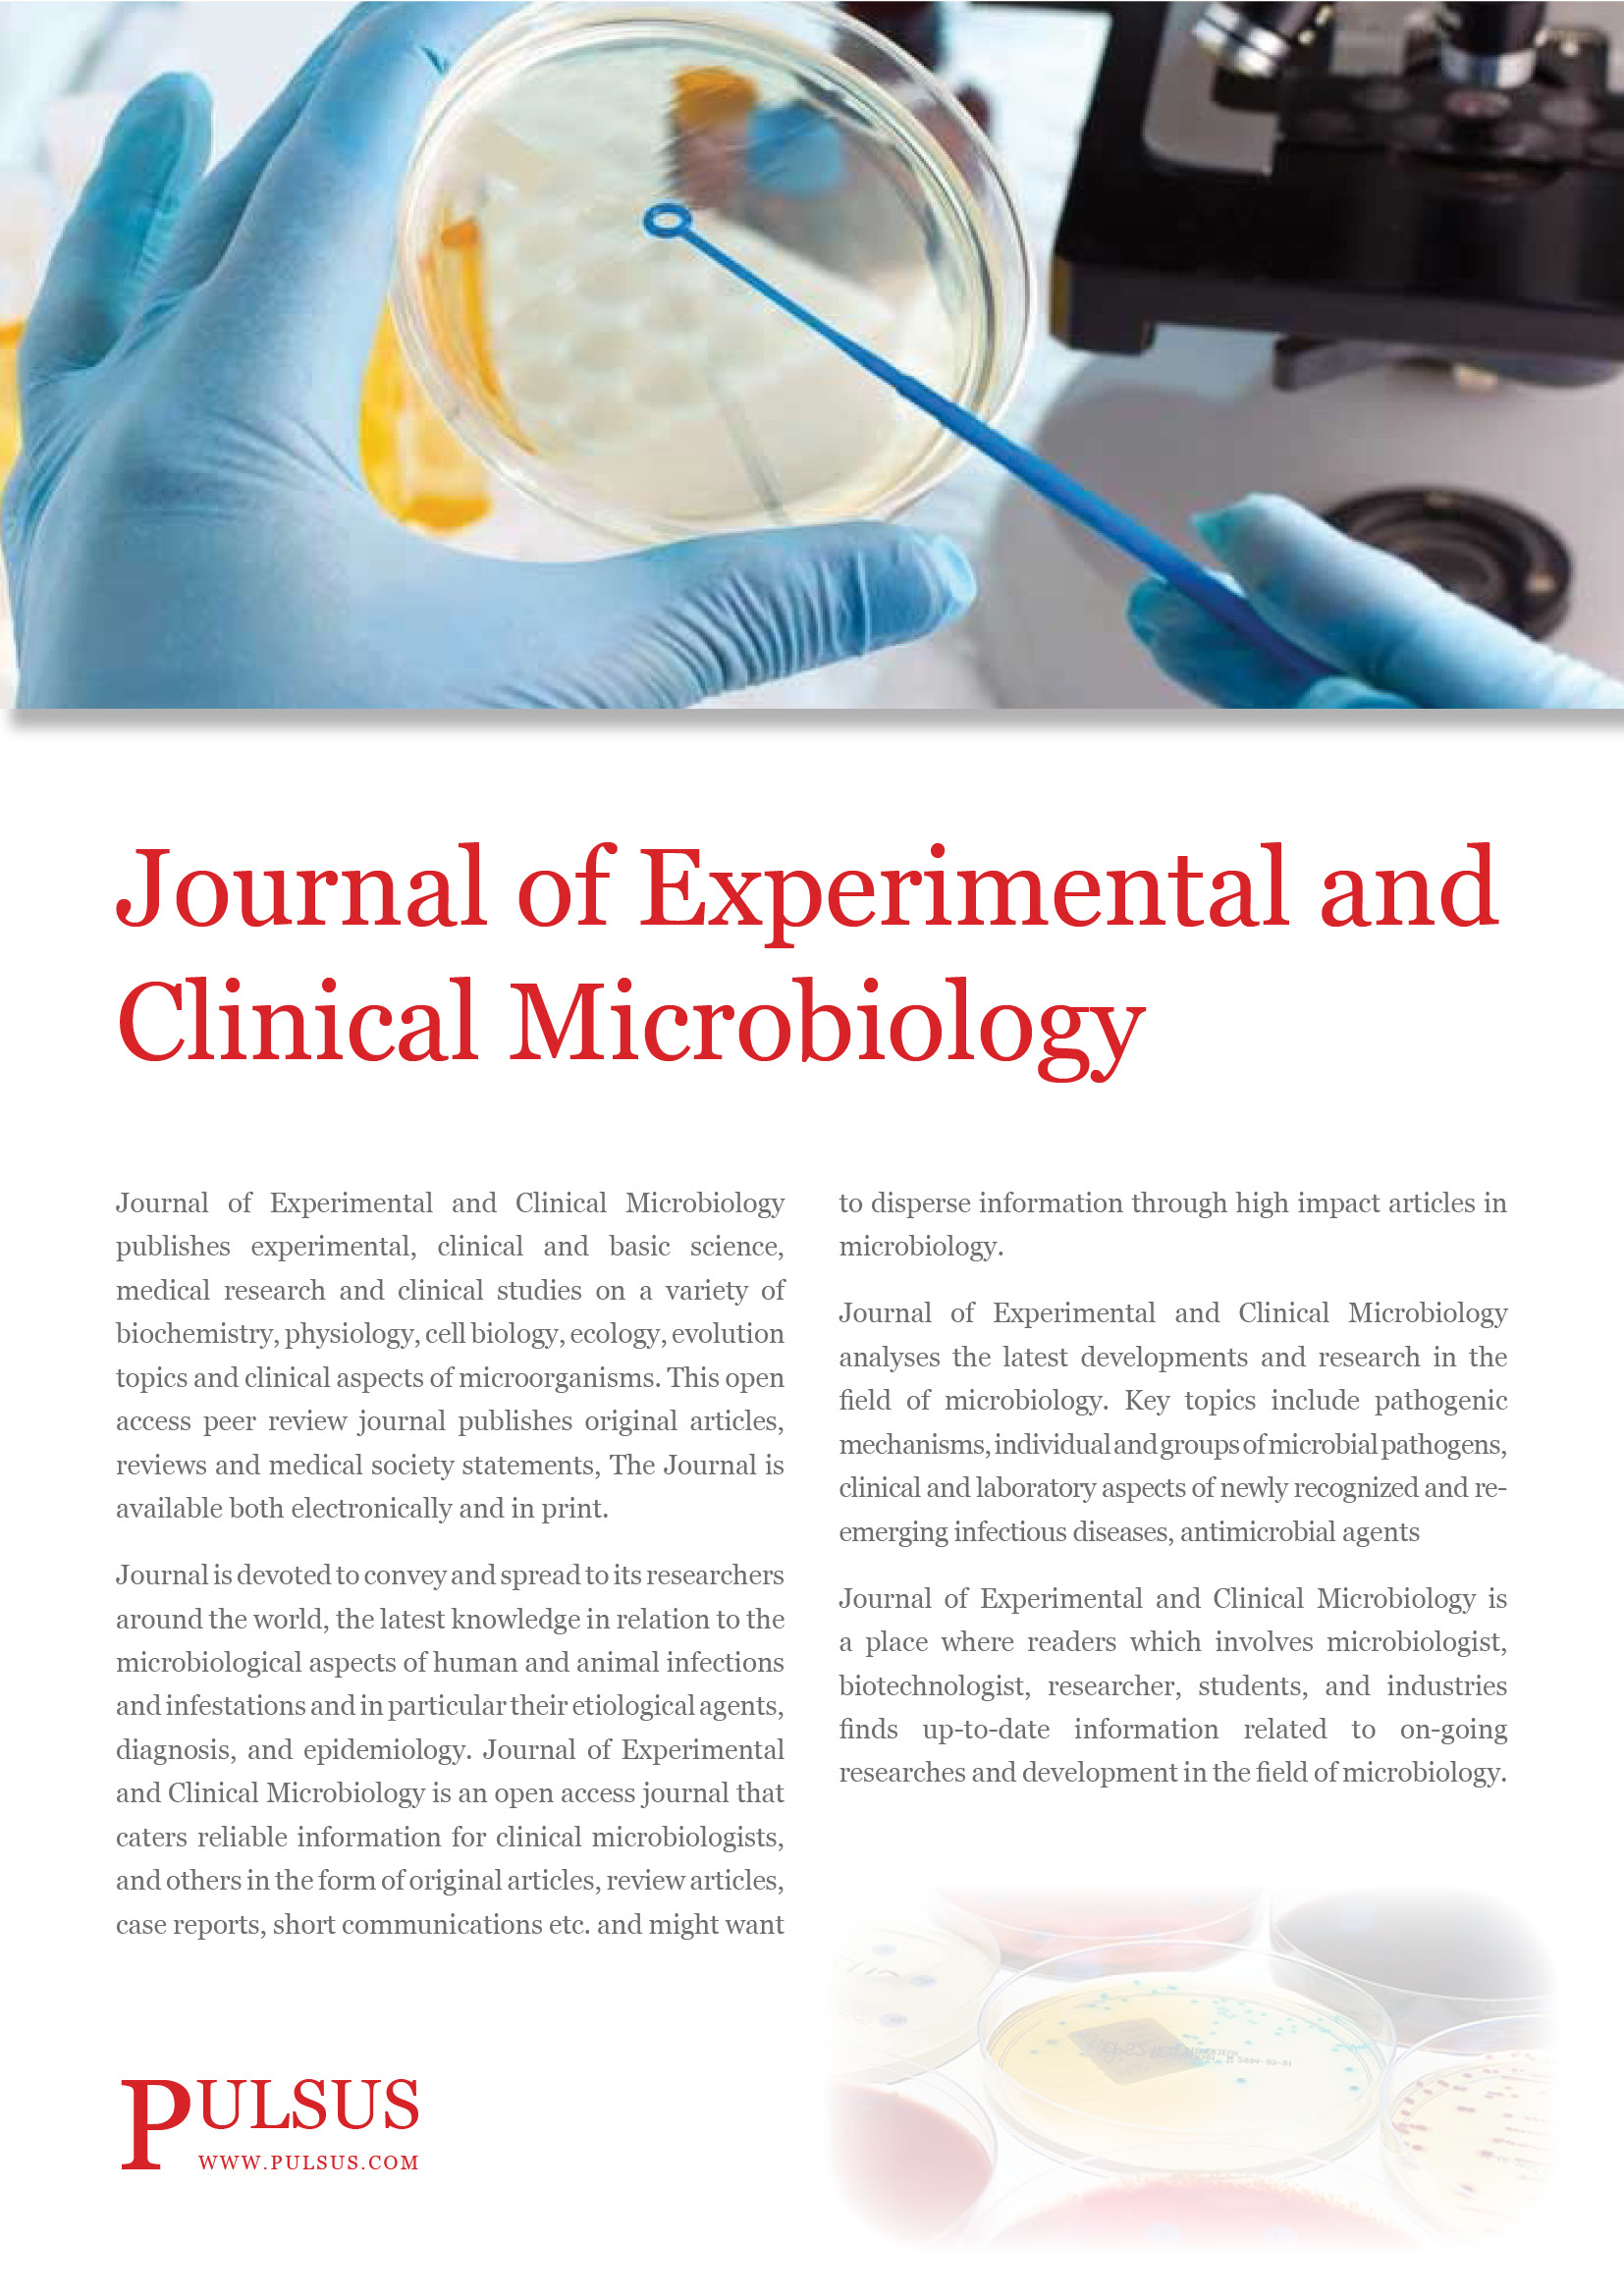 Journal of Experimental and Clinical Microbiology